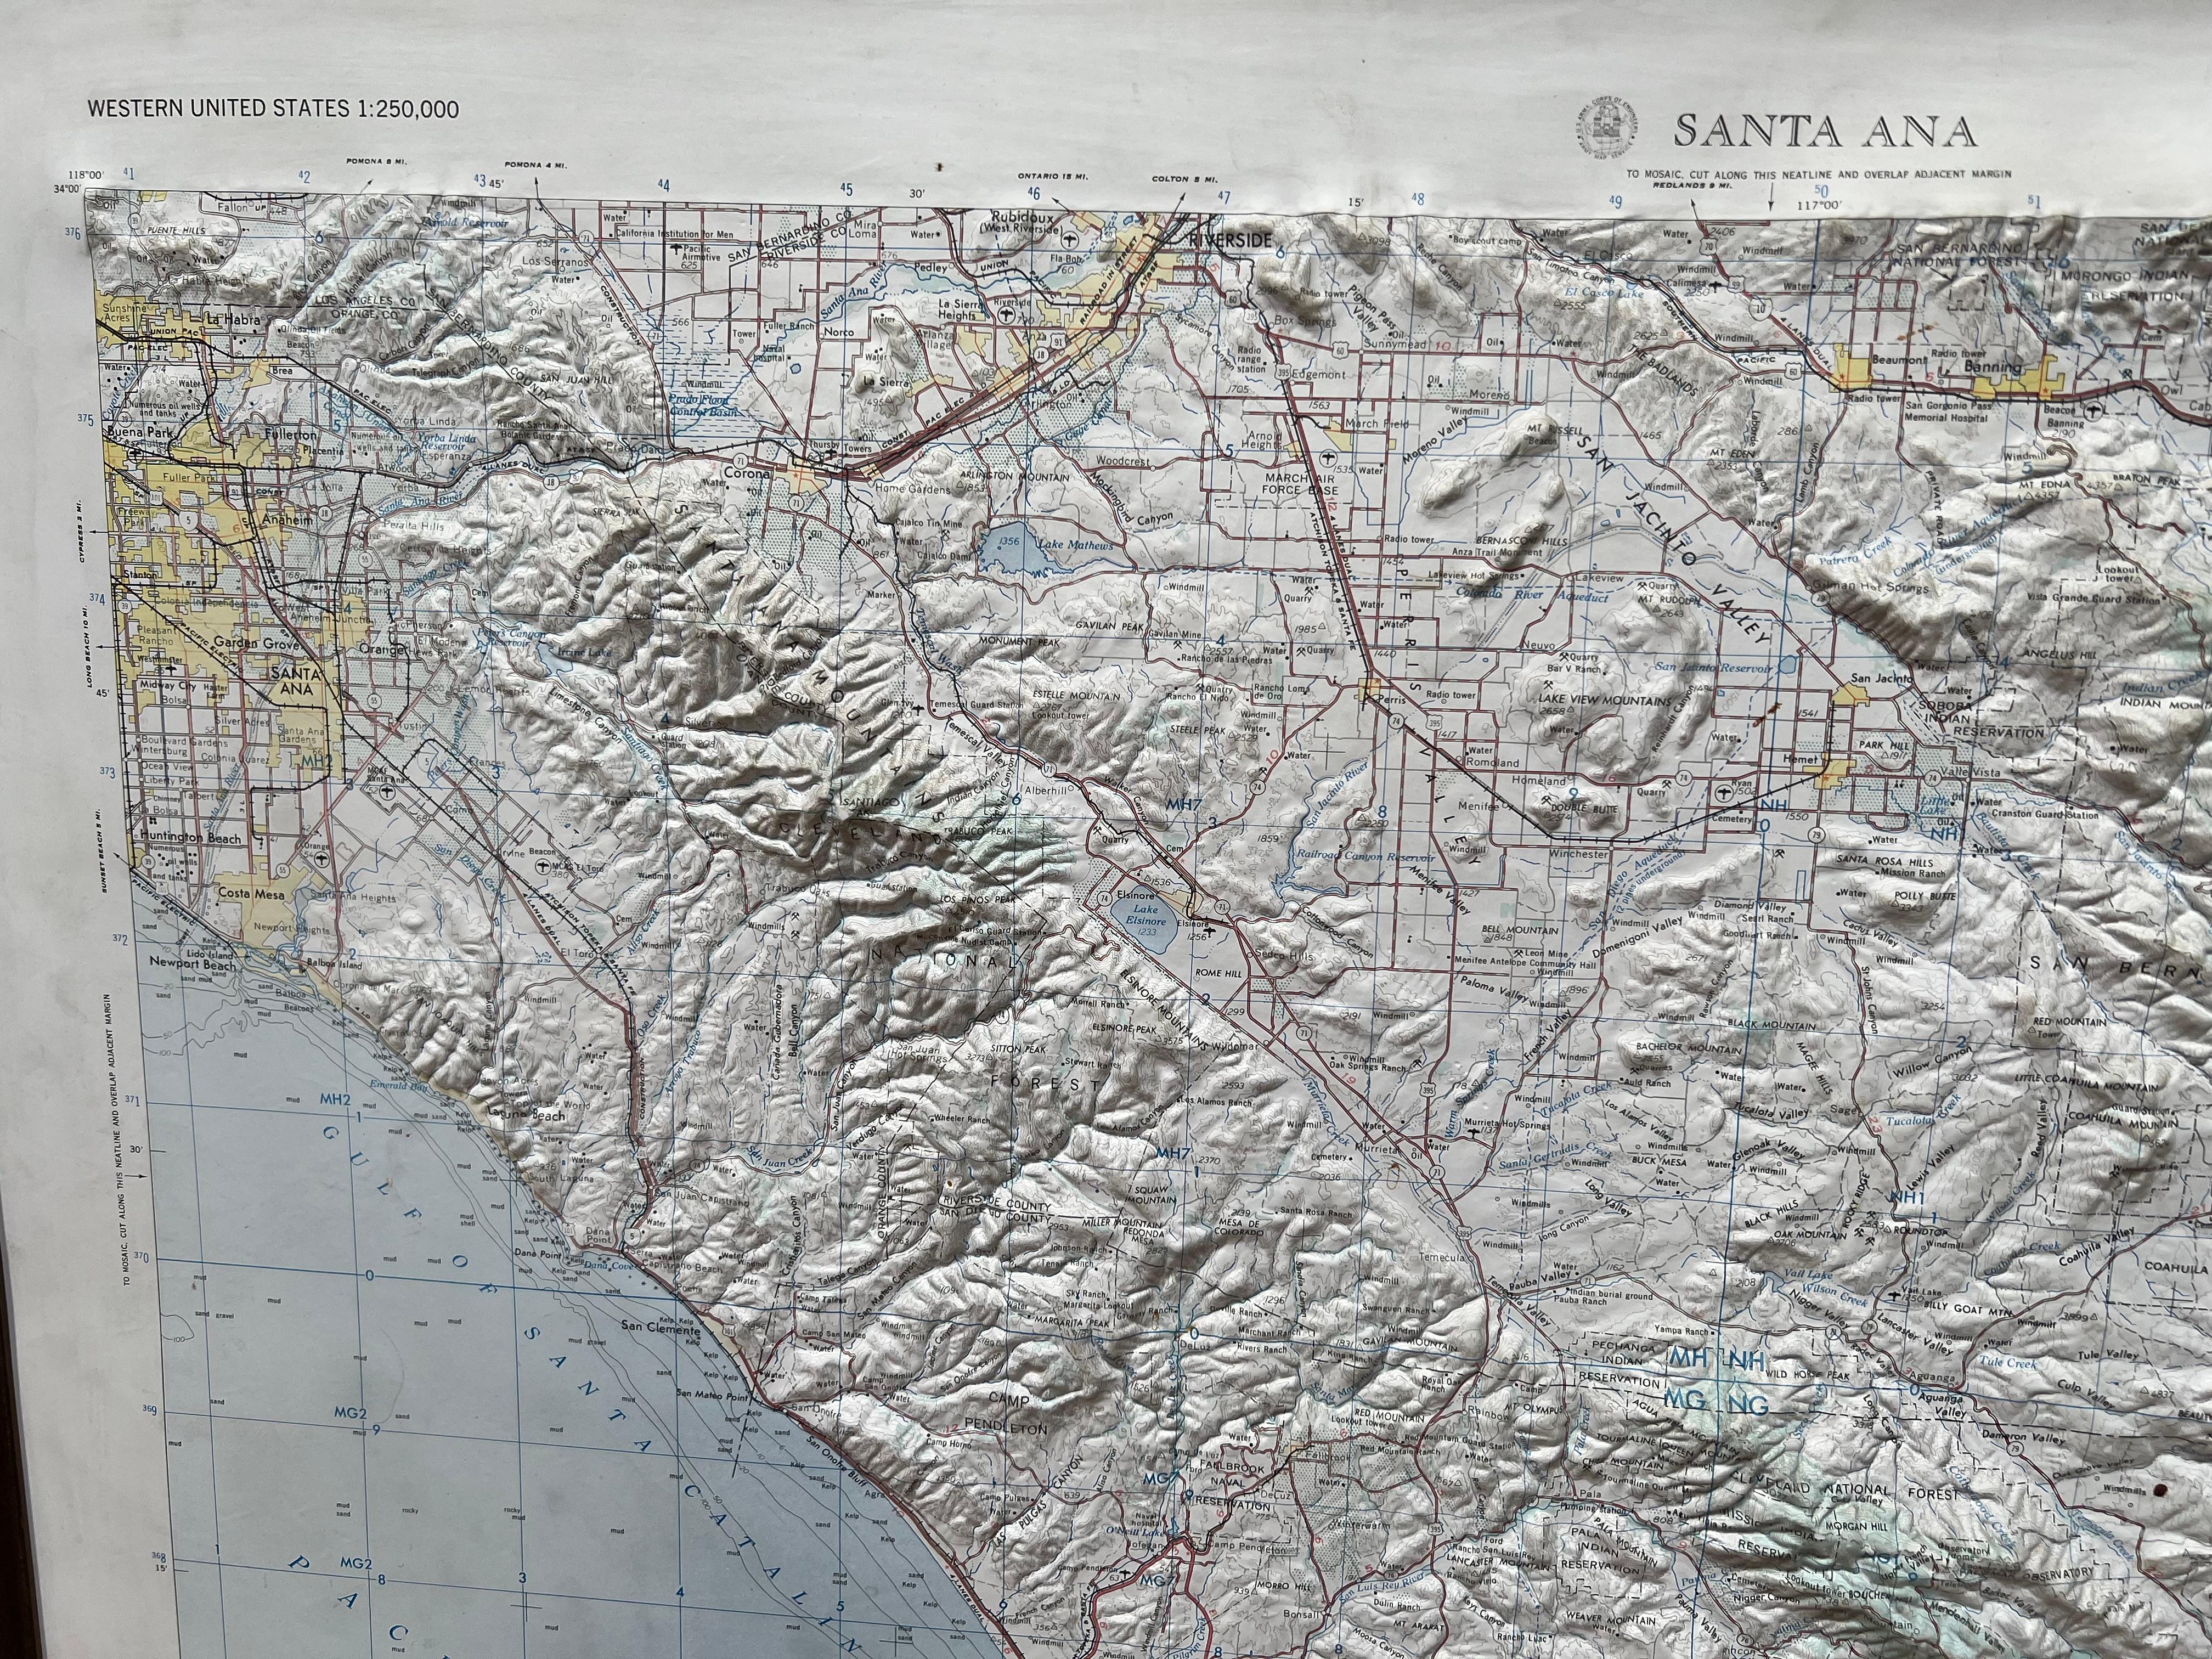 This map creates the illusion of 3D by applying Digital Elevation Data and meticulously adding shaded relief to the landscape of the original 1959 Santa Ana, CA map.
This mao has been reprinted and molded in 1969.